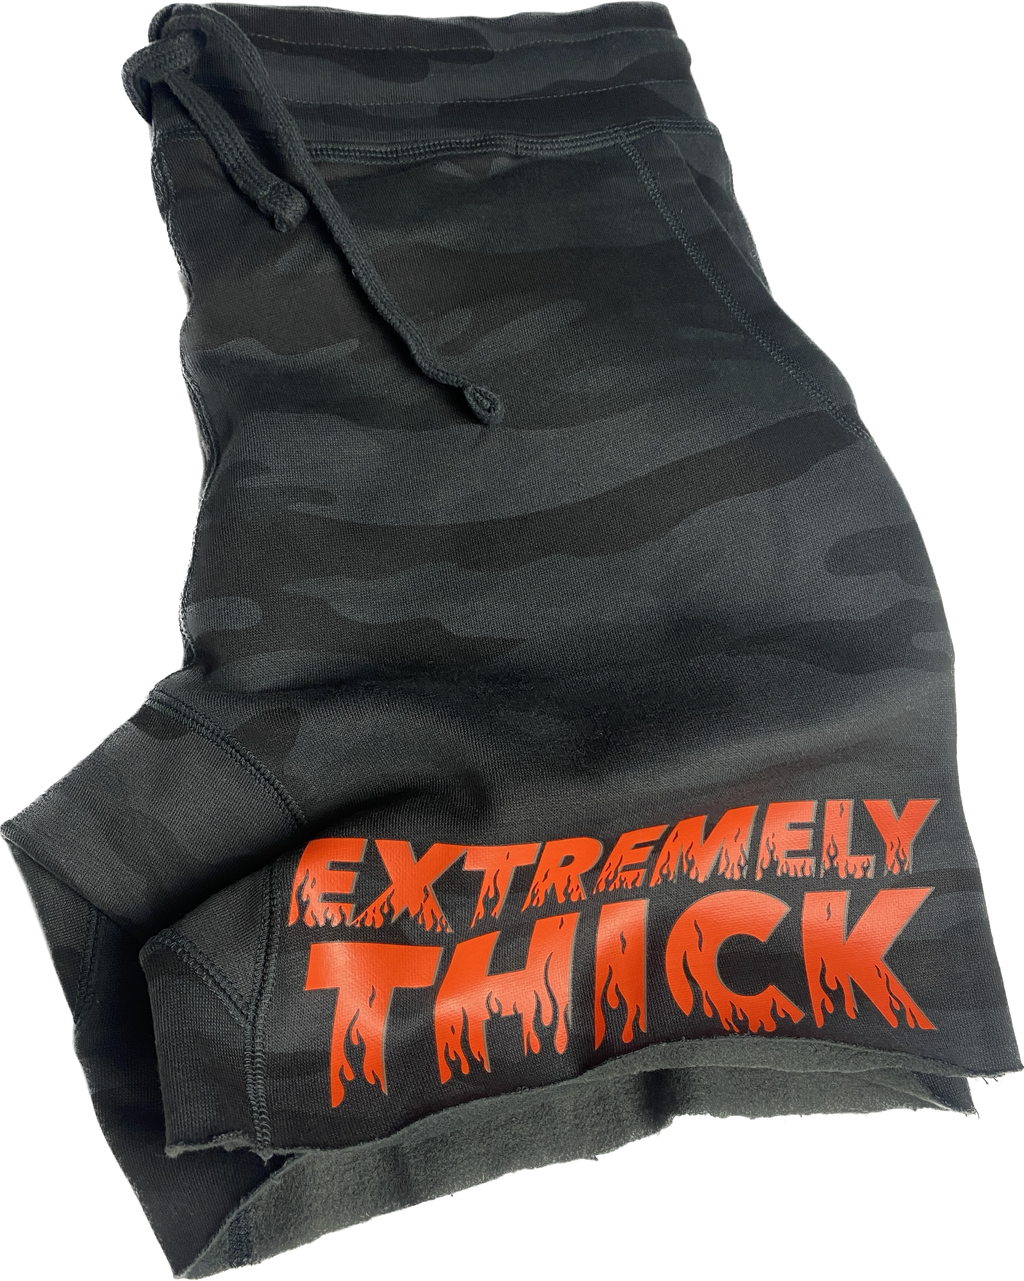 “EXTREMELY THICK” Black Camo Shorts